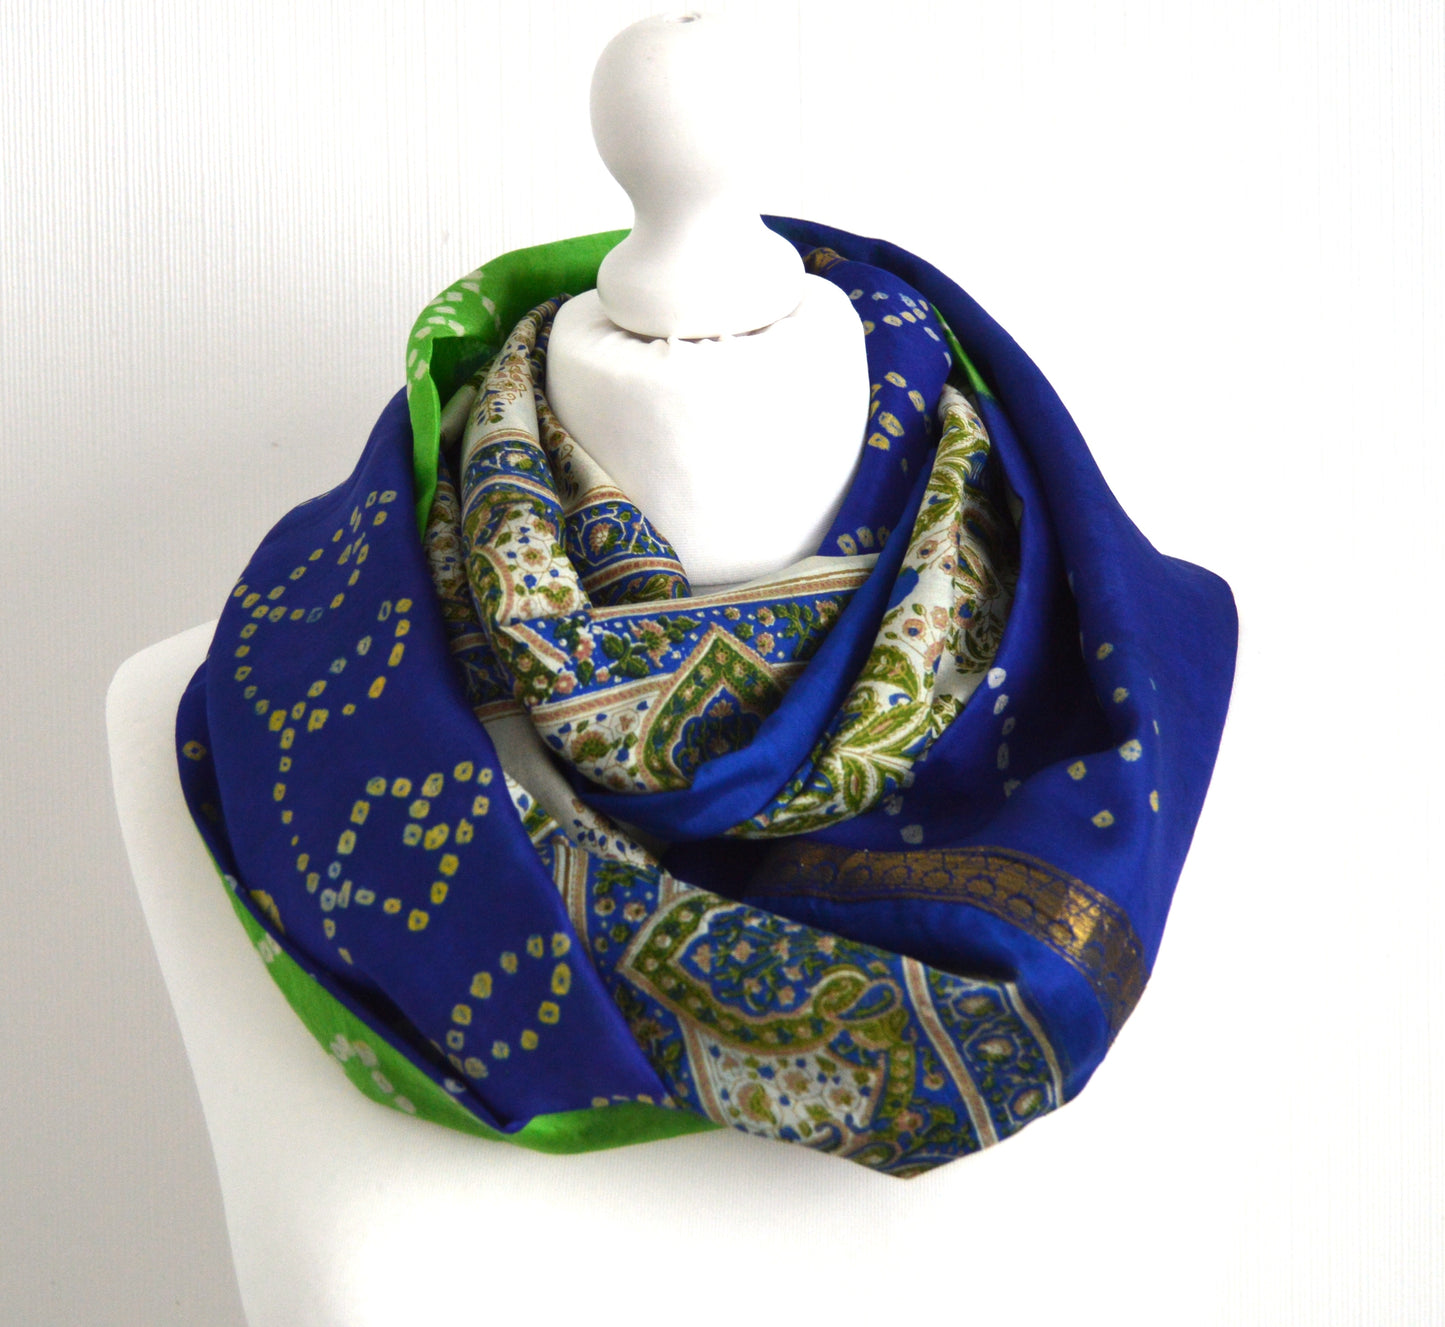 Blue Green Two Tone Sari Silk Infinity Scarf - Boho Eco Friendly Gift For Her - Unique Sophisticated Bohemian Autumn Fall Winter Scarf